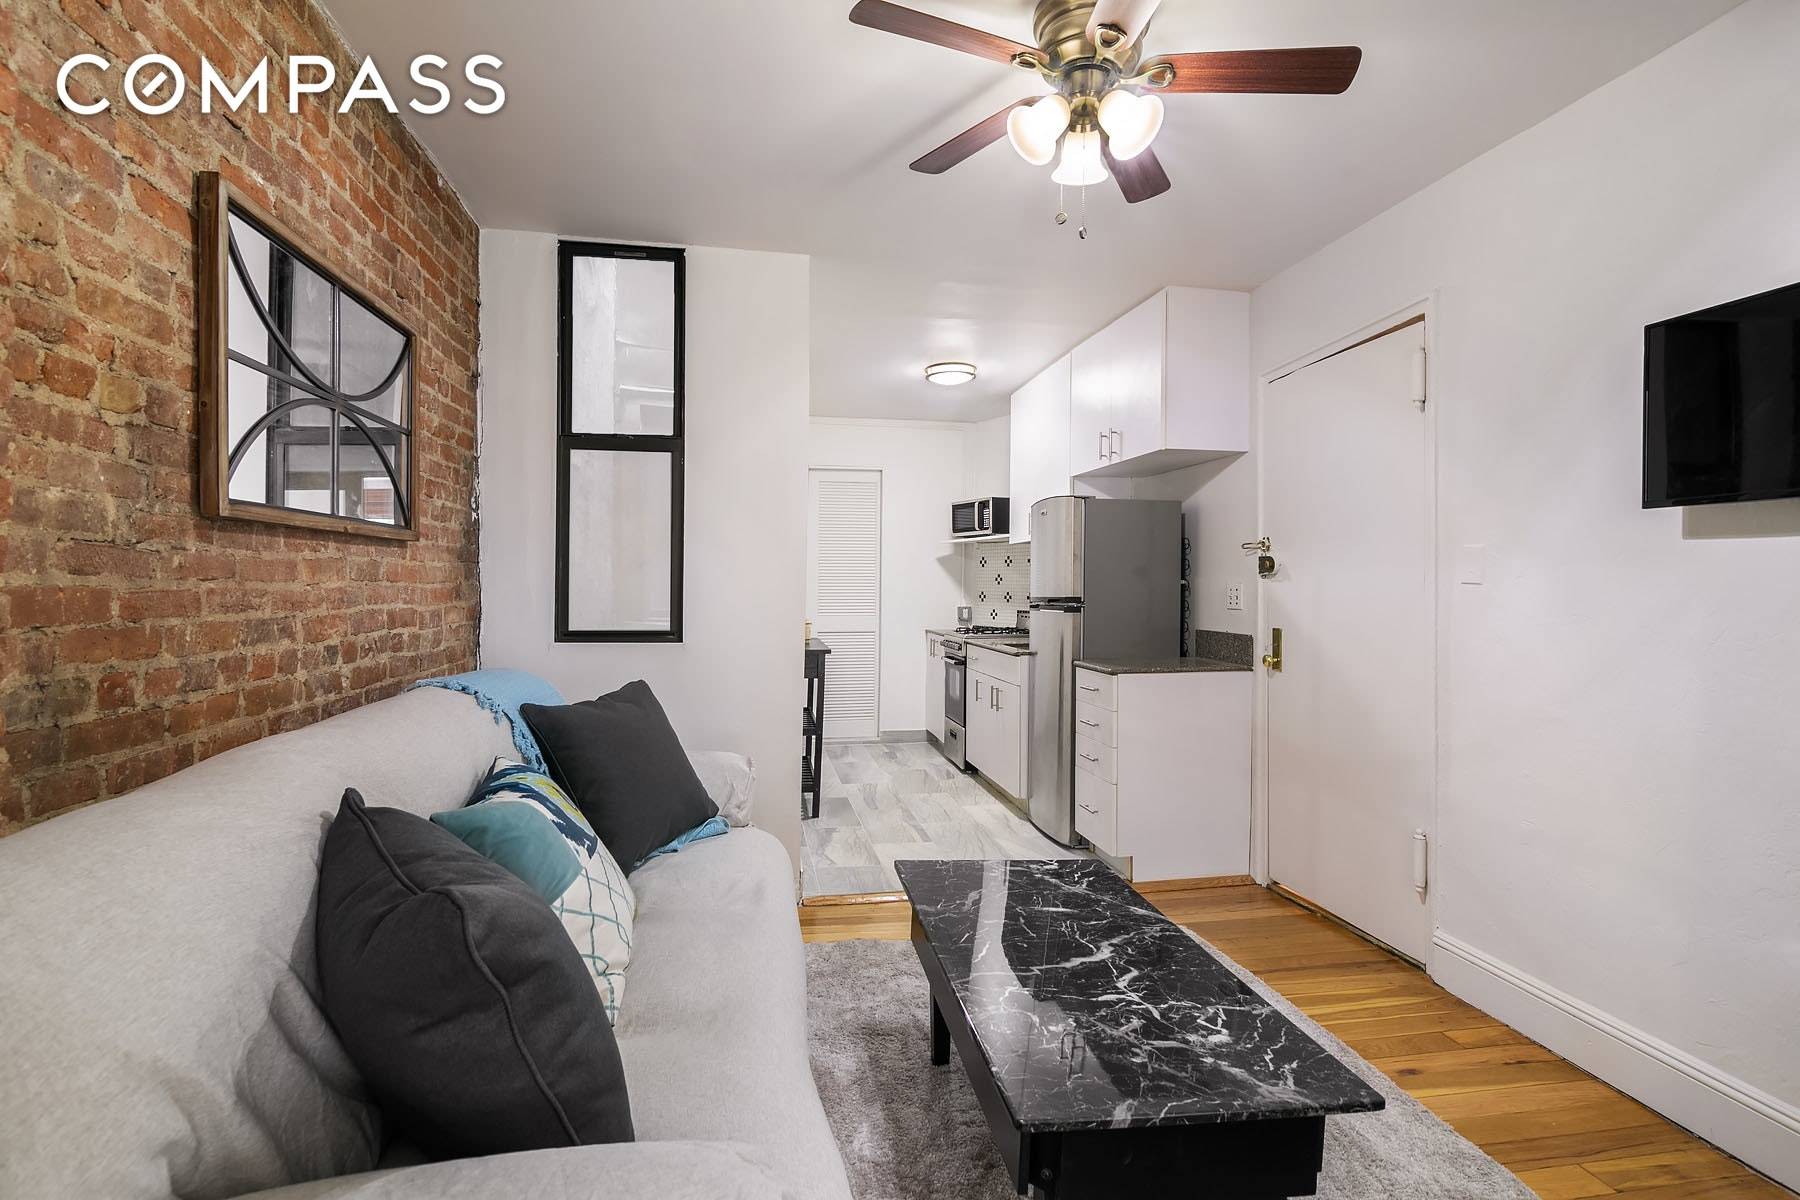 With a recently renovated kitchen and bathroom, 3 C is a move in ready affordable 1 bedroom unit in a charming, clean boutique brownstone building.